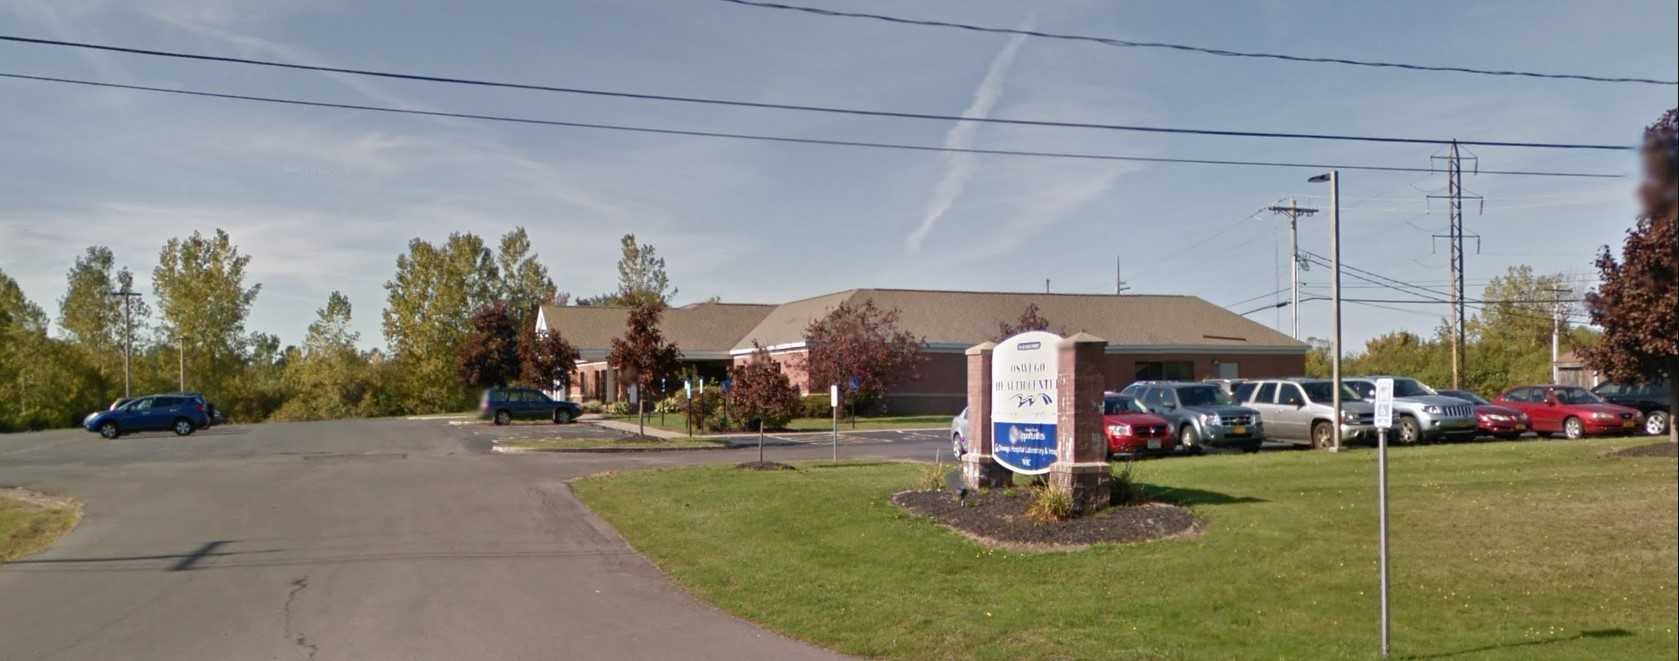 ConnextCare Oswego Medical Clinic